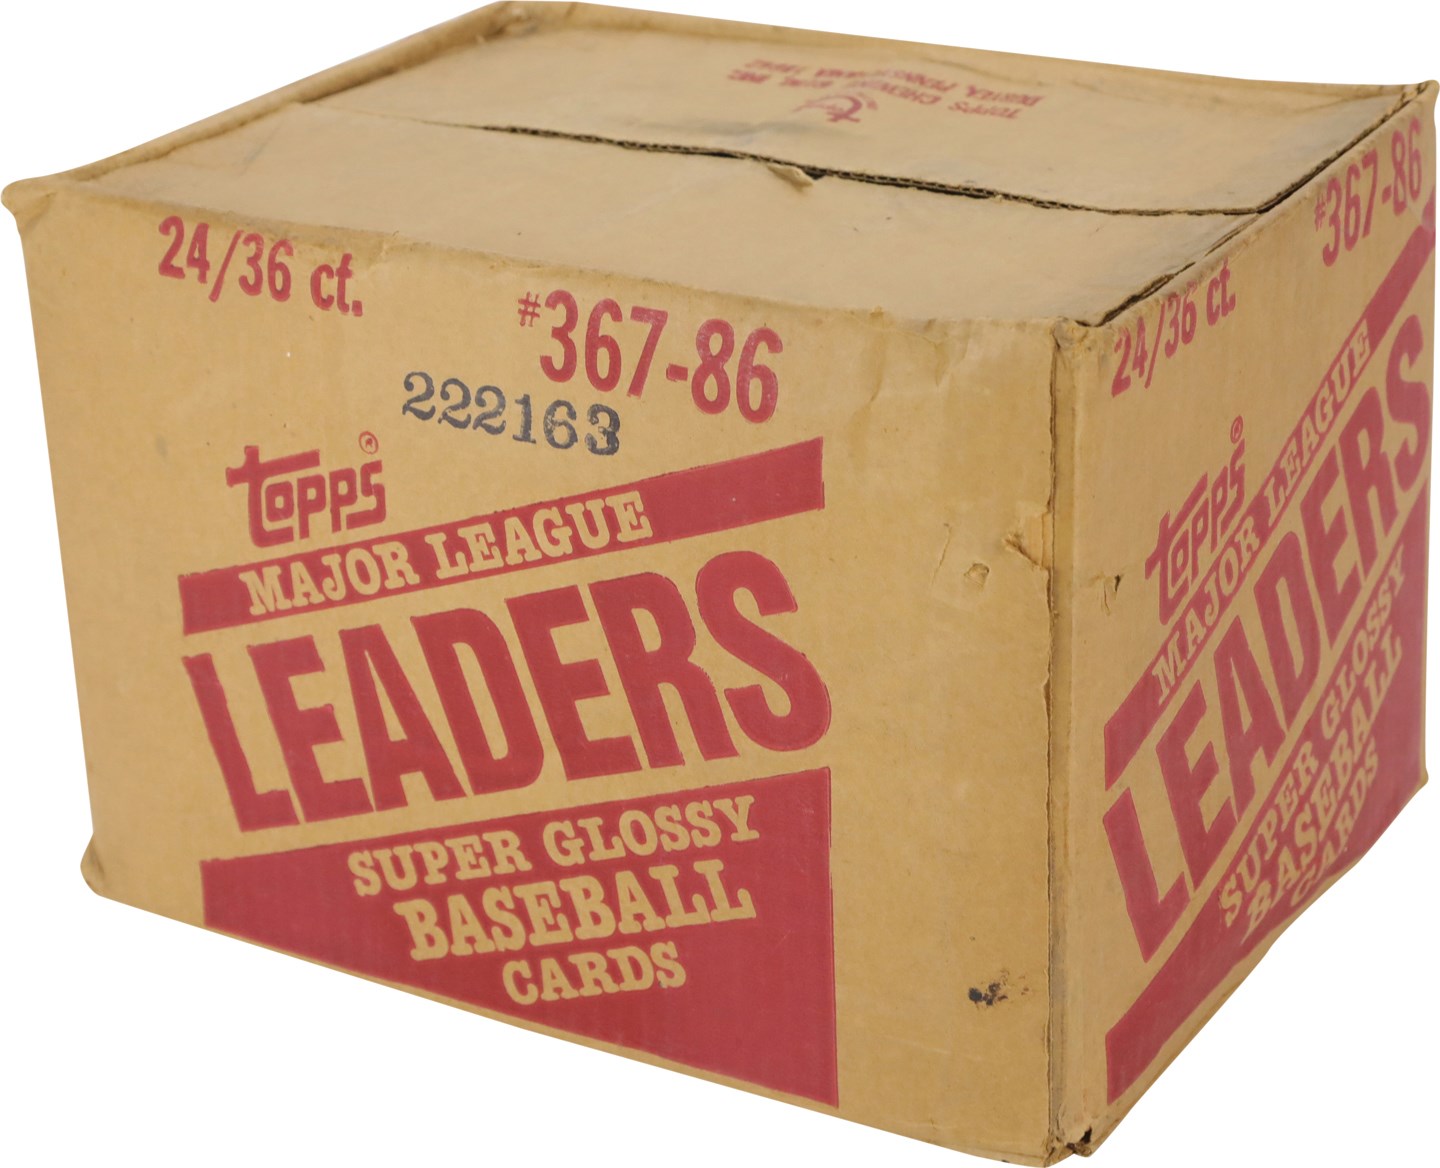 Unopened Boxes, Packs And Cases - 1986 Topps Leaders Wax Case w/24 Unopened Boxes